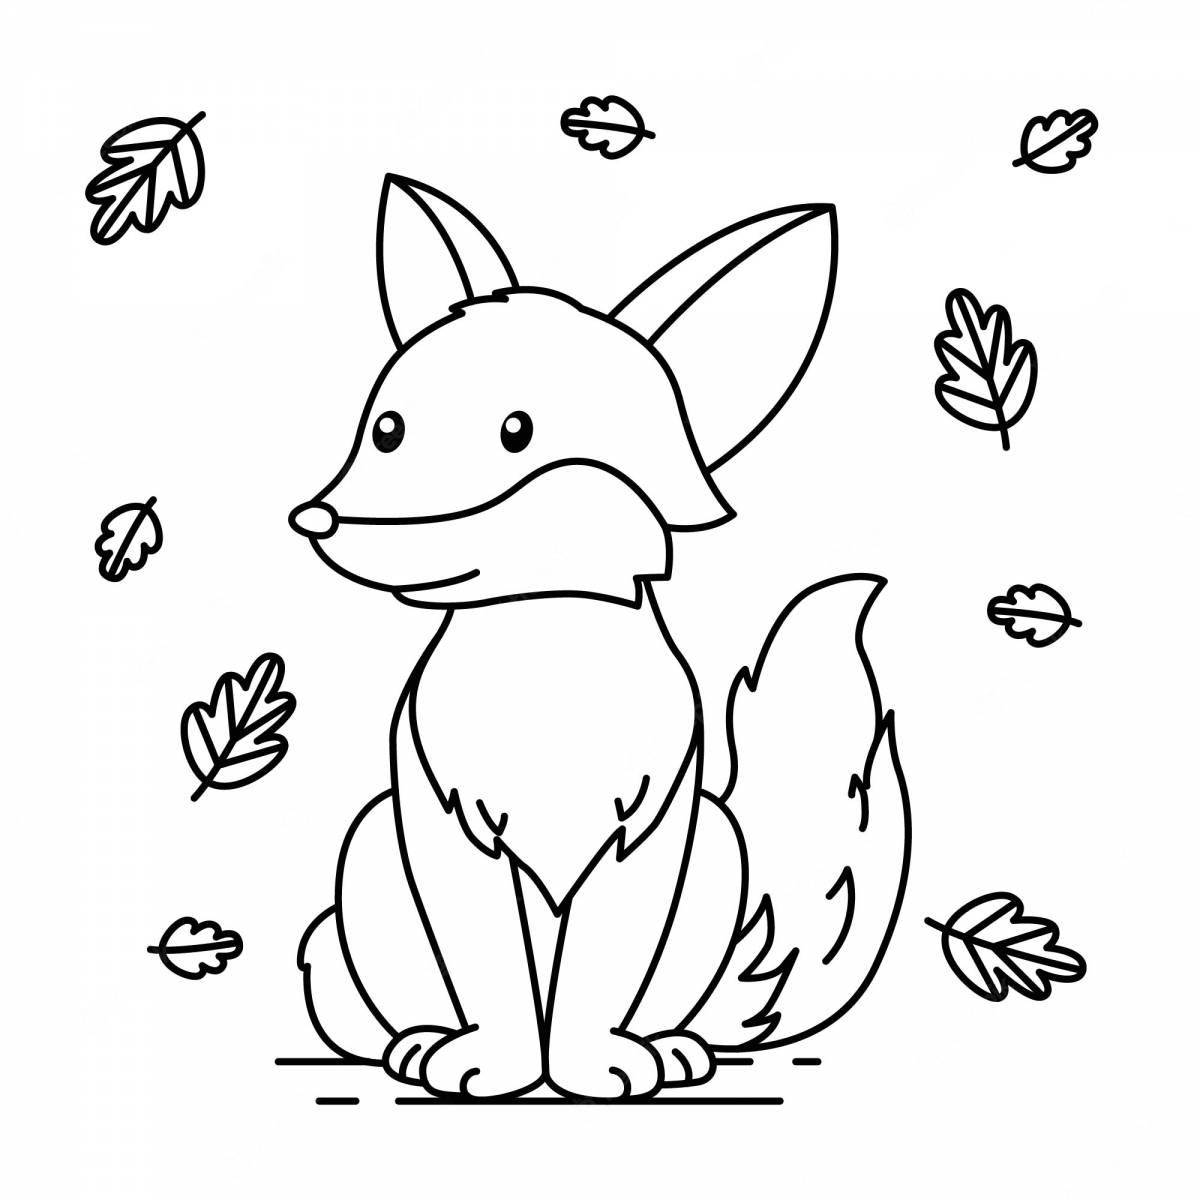 Coloring book cheerful fox for children 6-7 years old